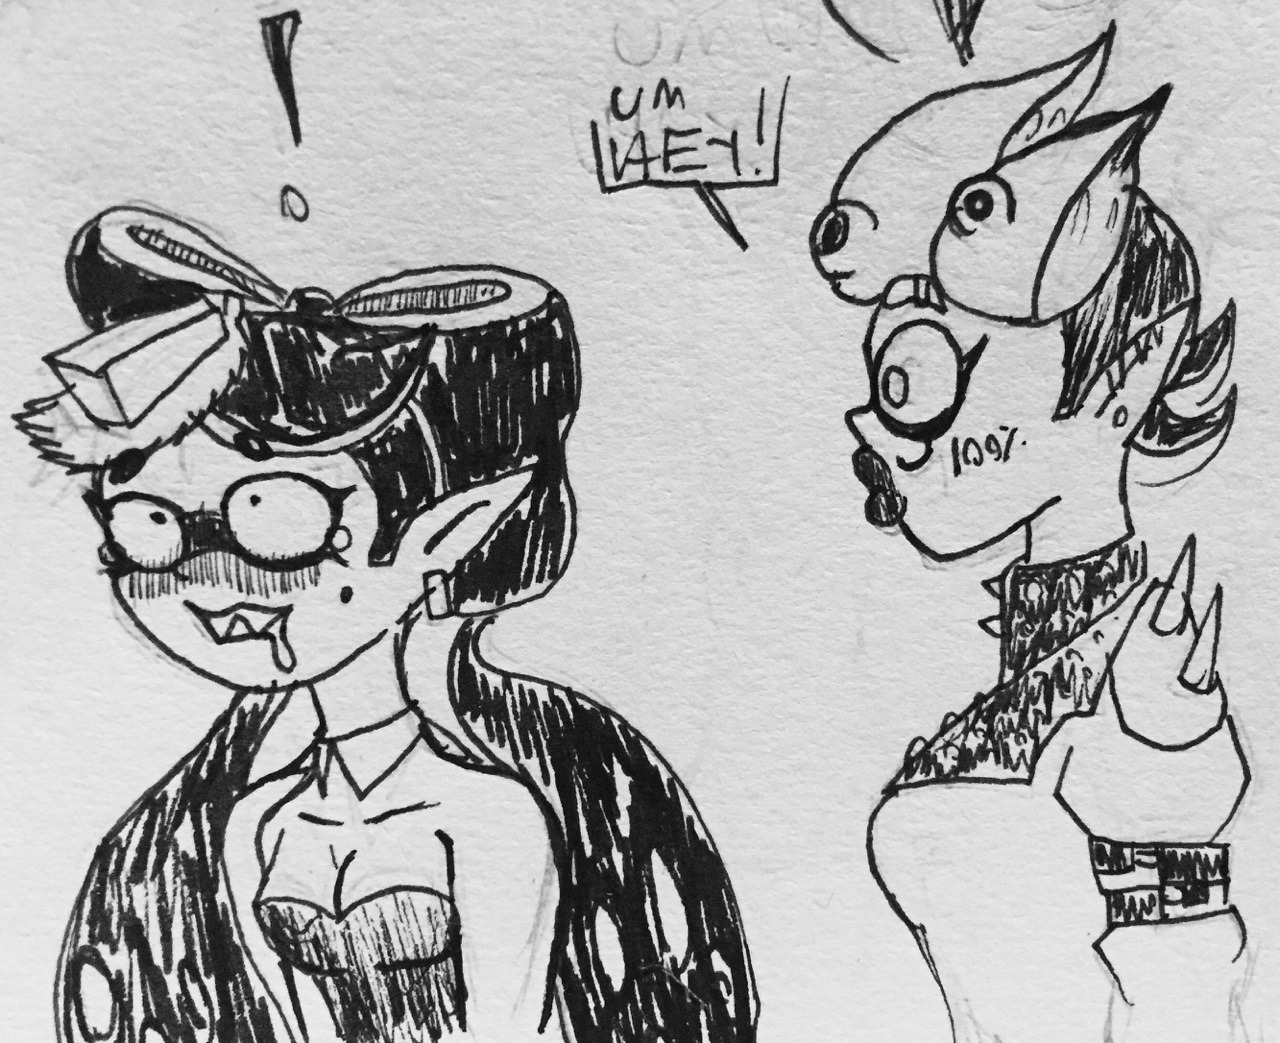 theoctogellifamily: //ITS INKED MY DUDE   So I was messing around with Younger Paige’s